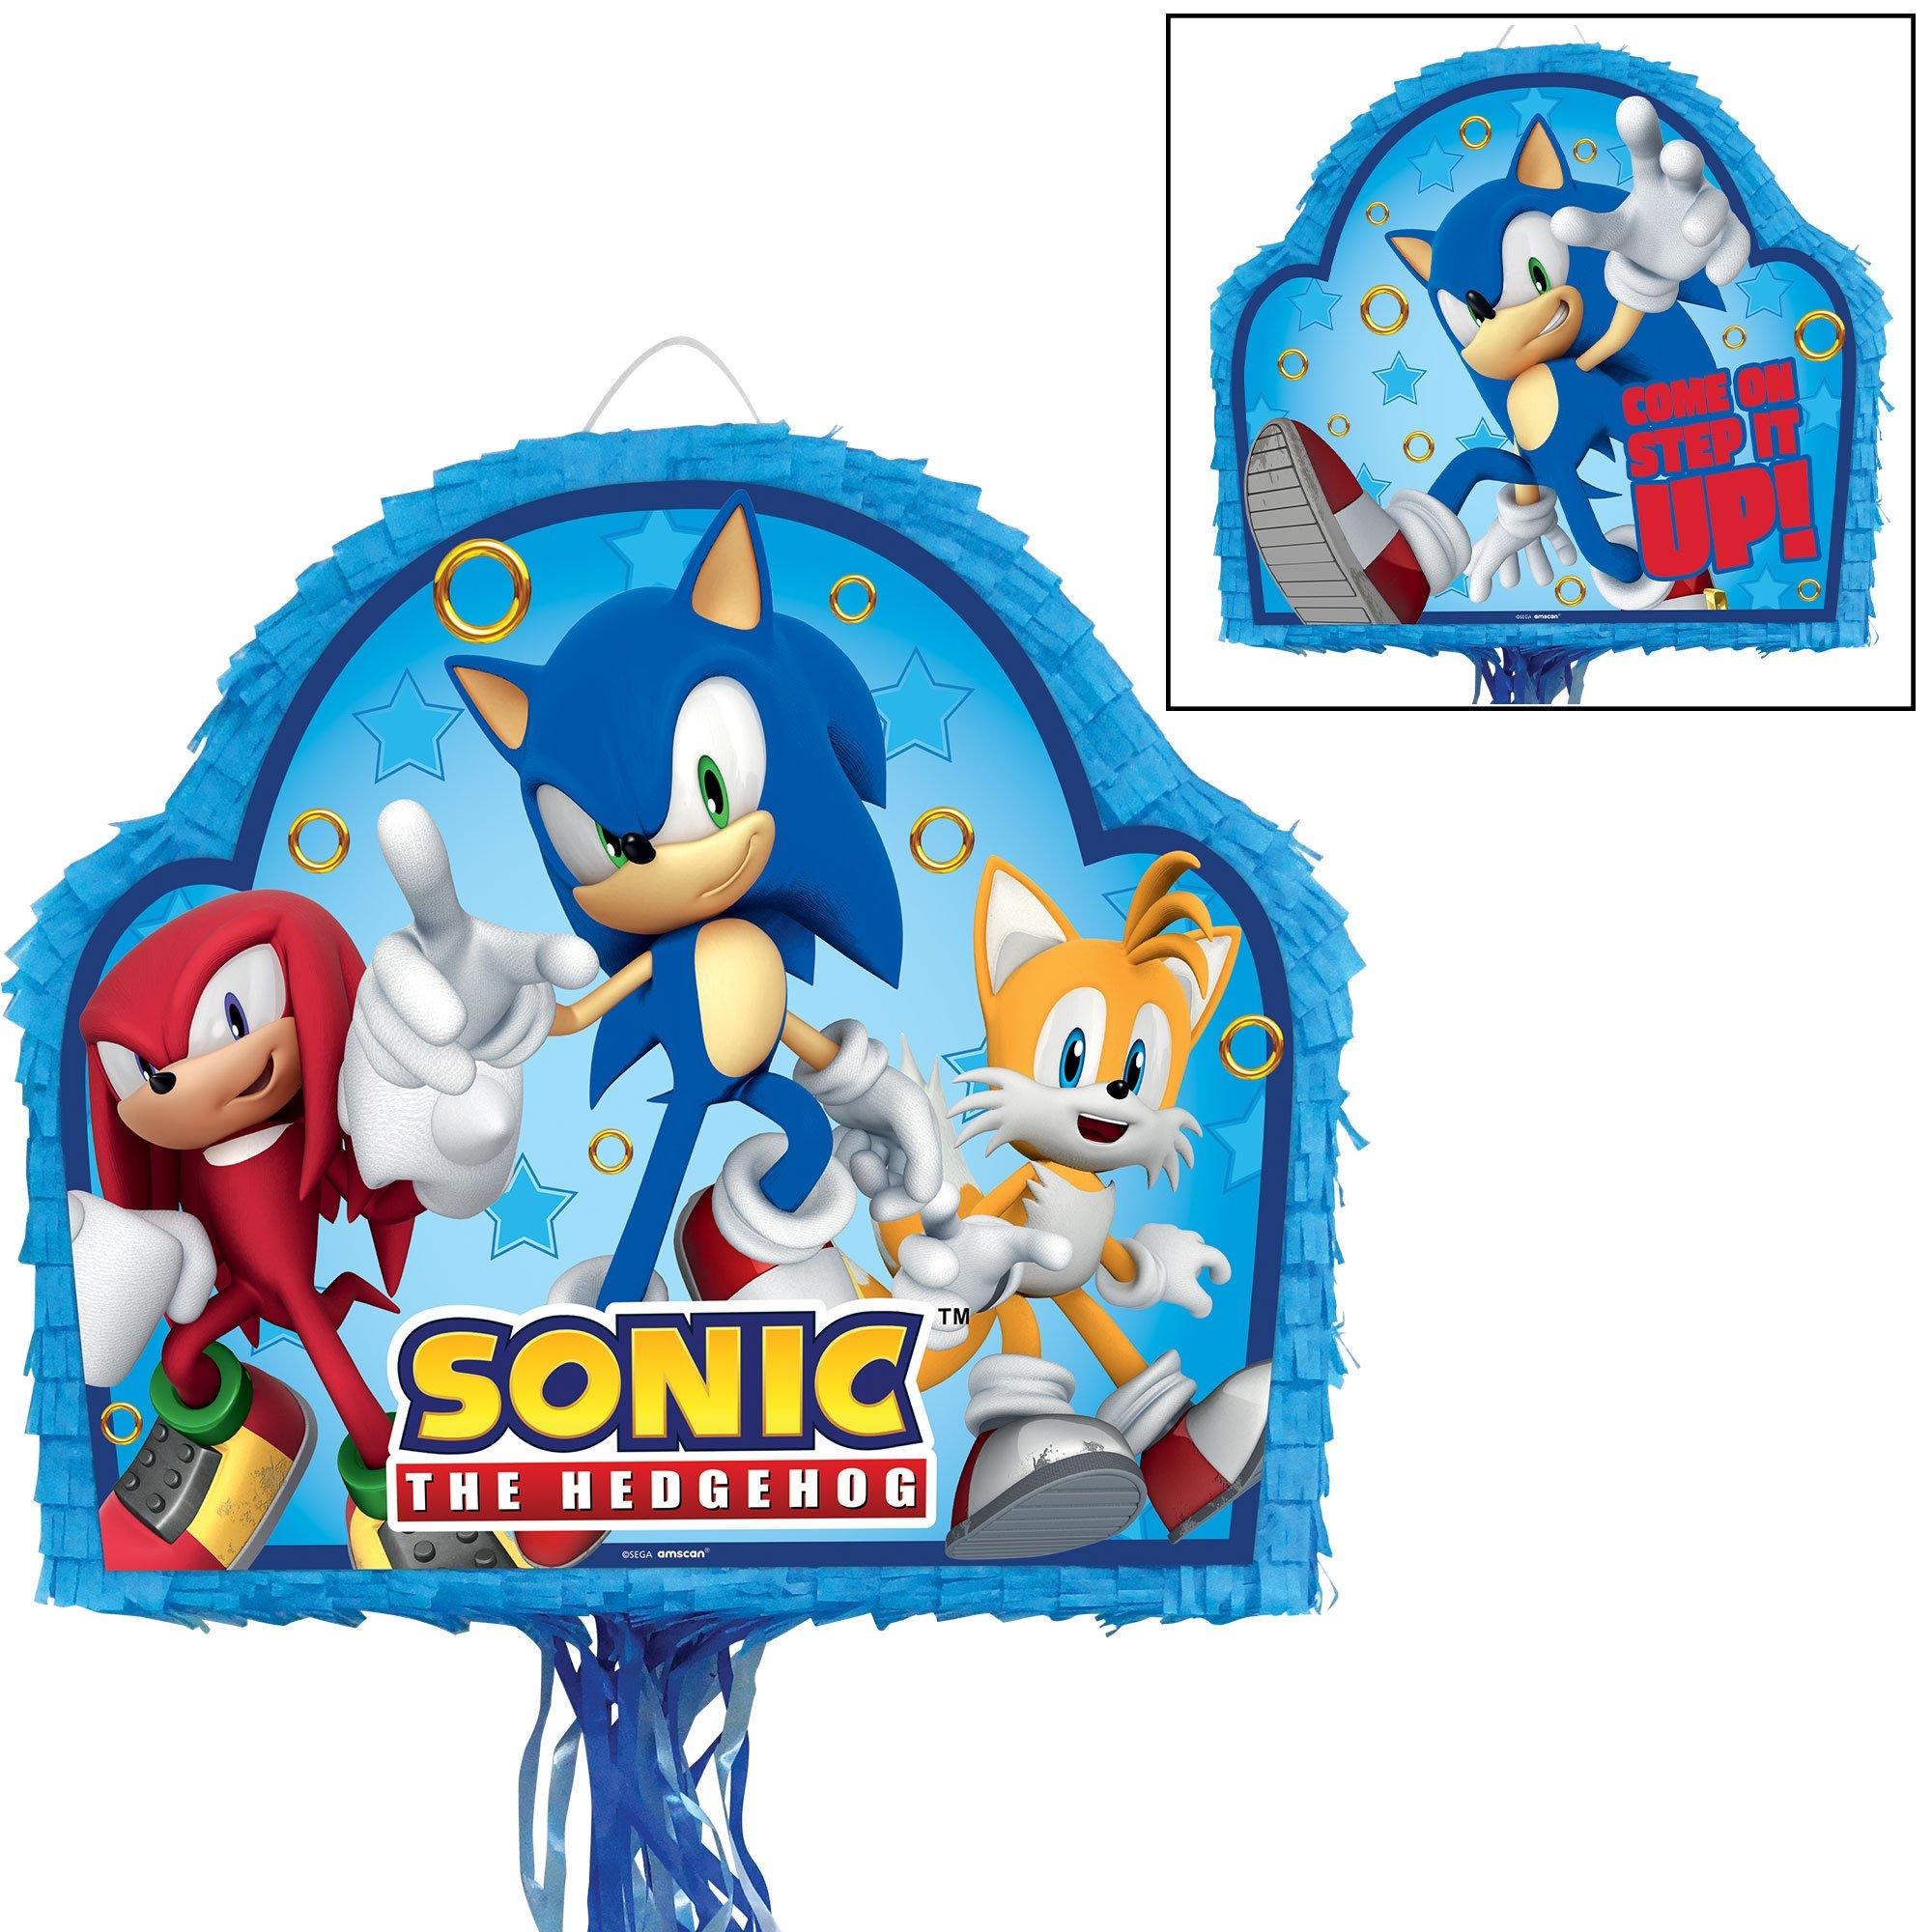 Sonic Number 7 Pinata with stick pinata included. Size 40cm tall